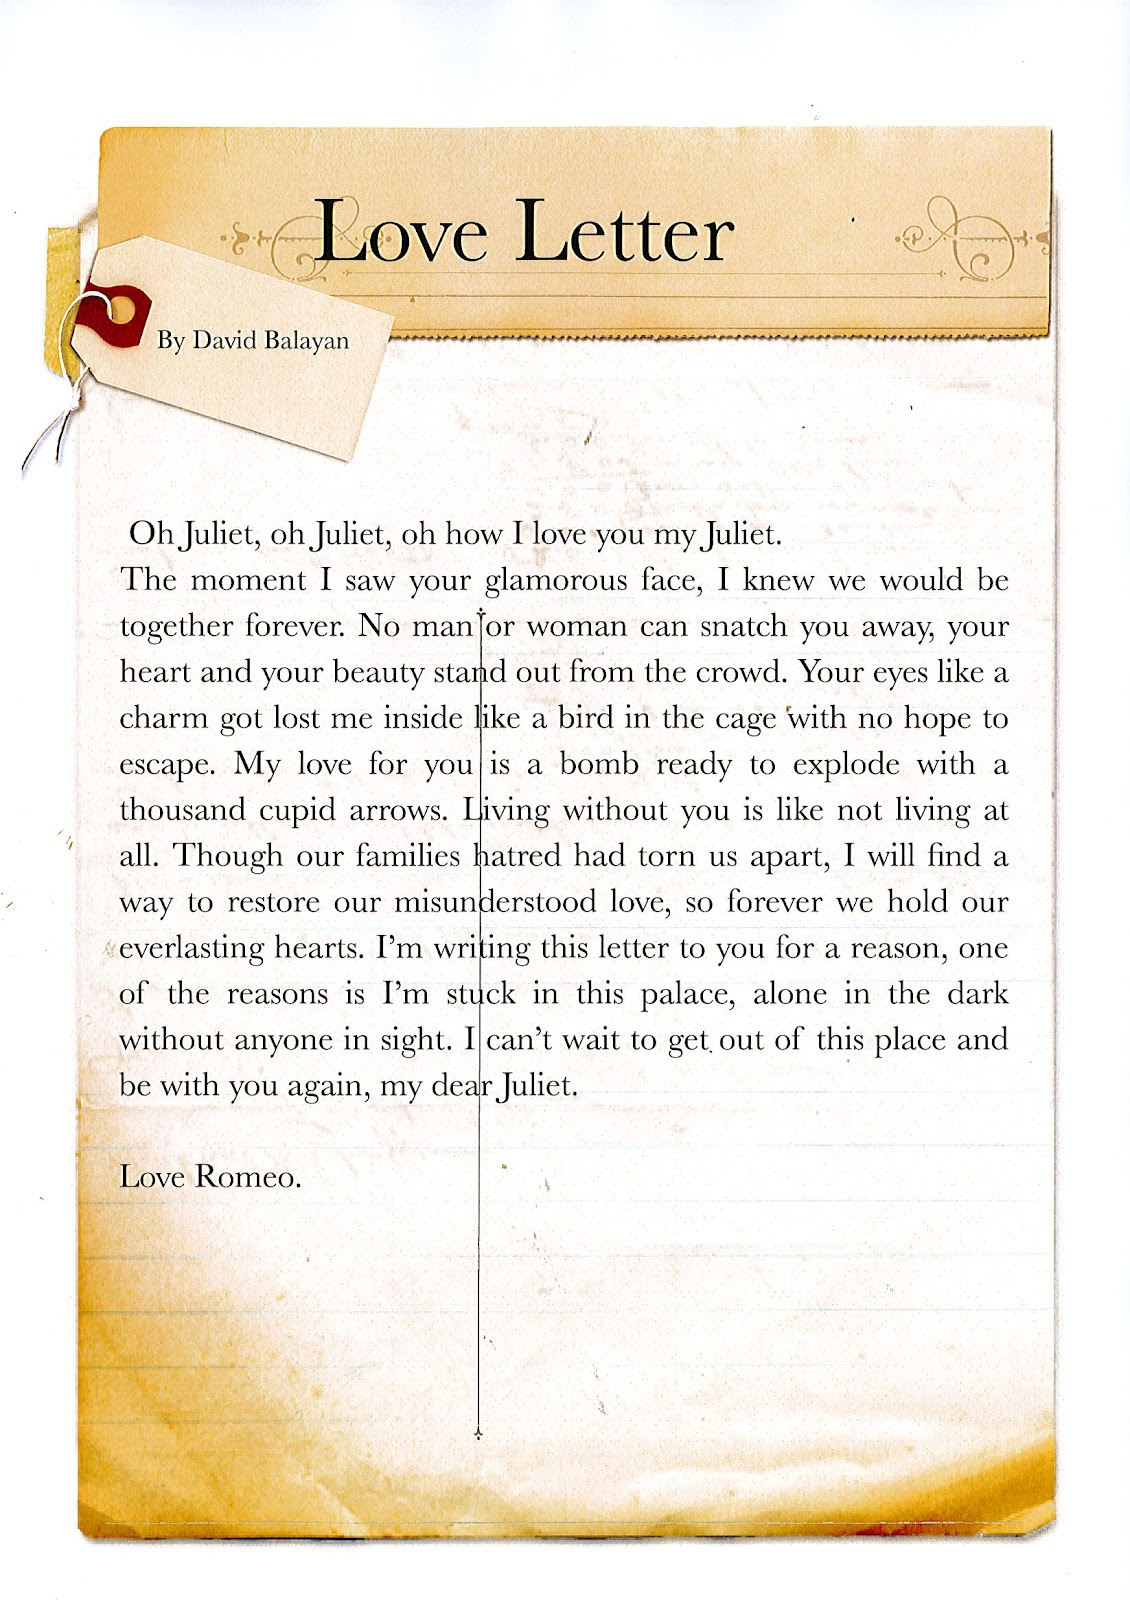 Letters to Juliet